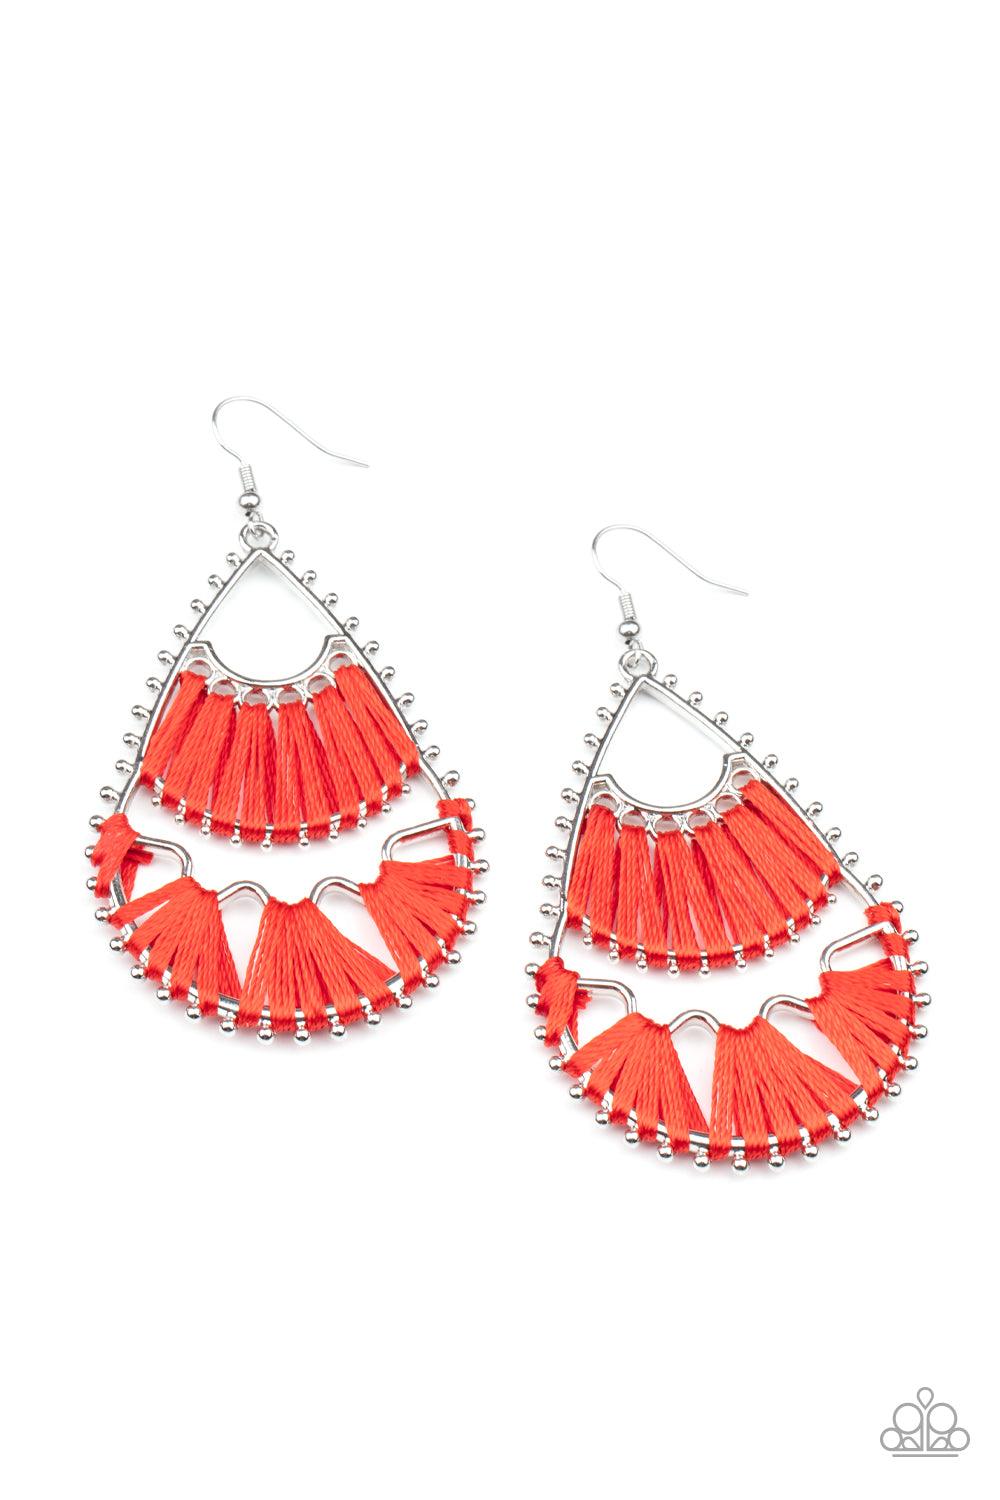 Paparazzi Accessories Samba Scene - Red Three abstract silver fittings section off the inside of a pronged teardrop. Red thread is wrapped around the bar-like fittings, creating colorful loom-like accents. Earring attaches to a standard fishhook fitting.